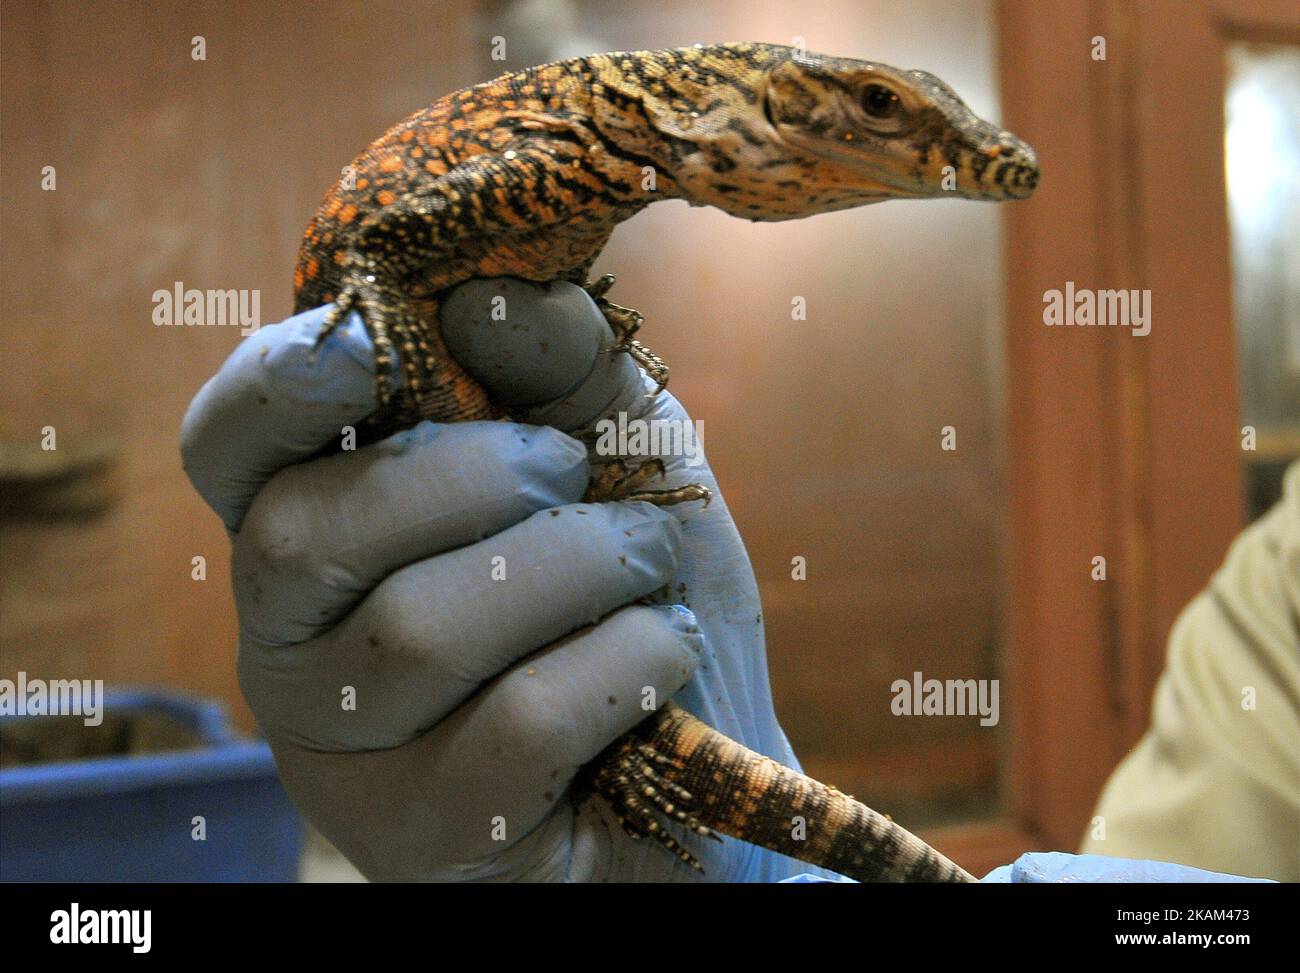 Animals keepers cleaning the baby's body newly hatched Komodo dragons  (Varanus Komodoensis) at Taman Safari Indonesia, Bogor, West Java, On March  12, 2017. Twenty-one Komodo dragons hatching eggs from March 2 to